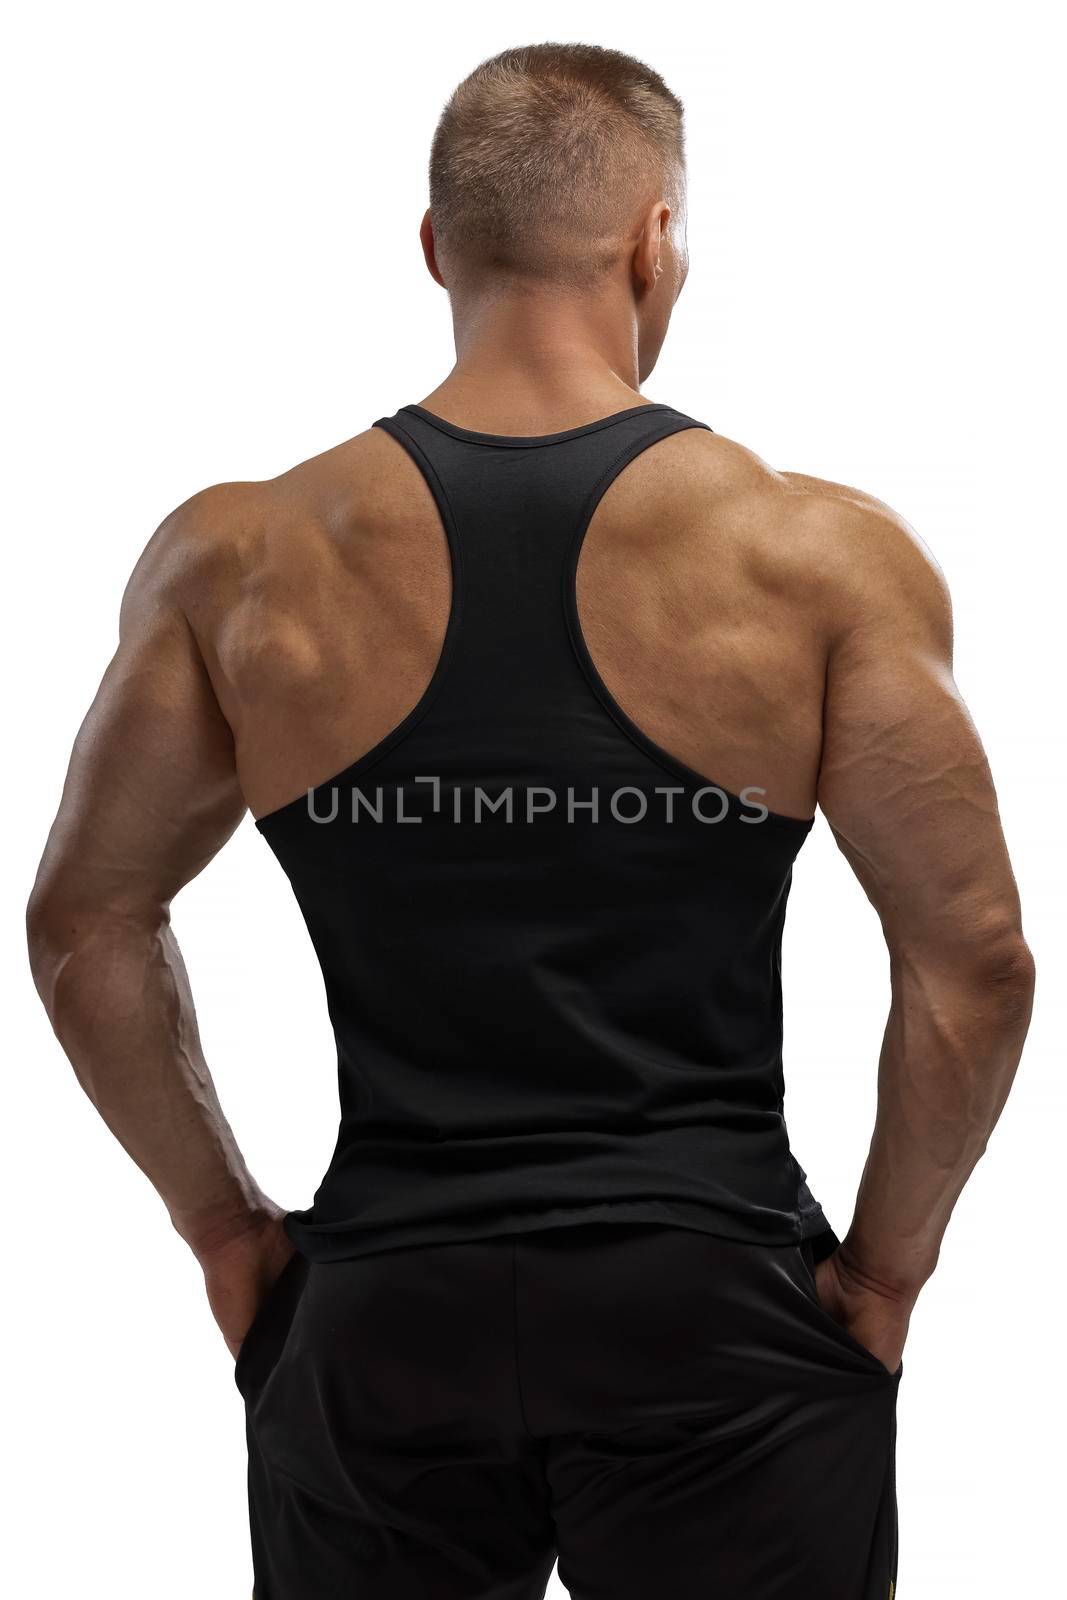 Attractive athlete posing in black tank-top in white background by but_photo